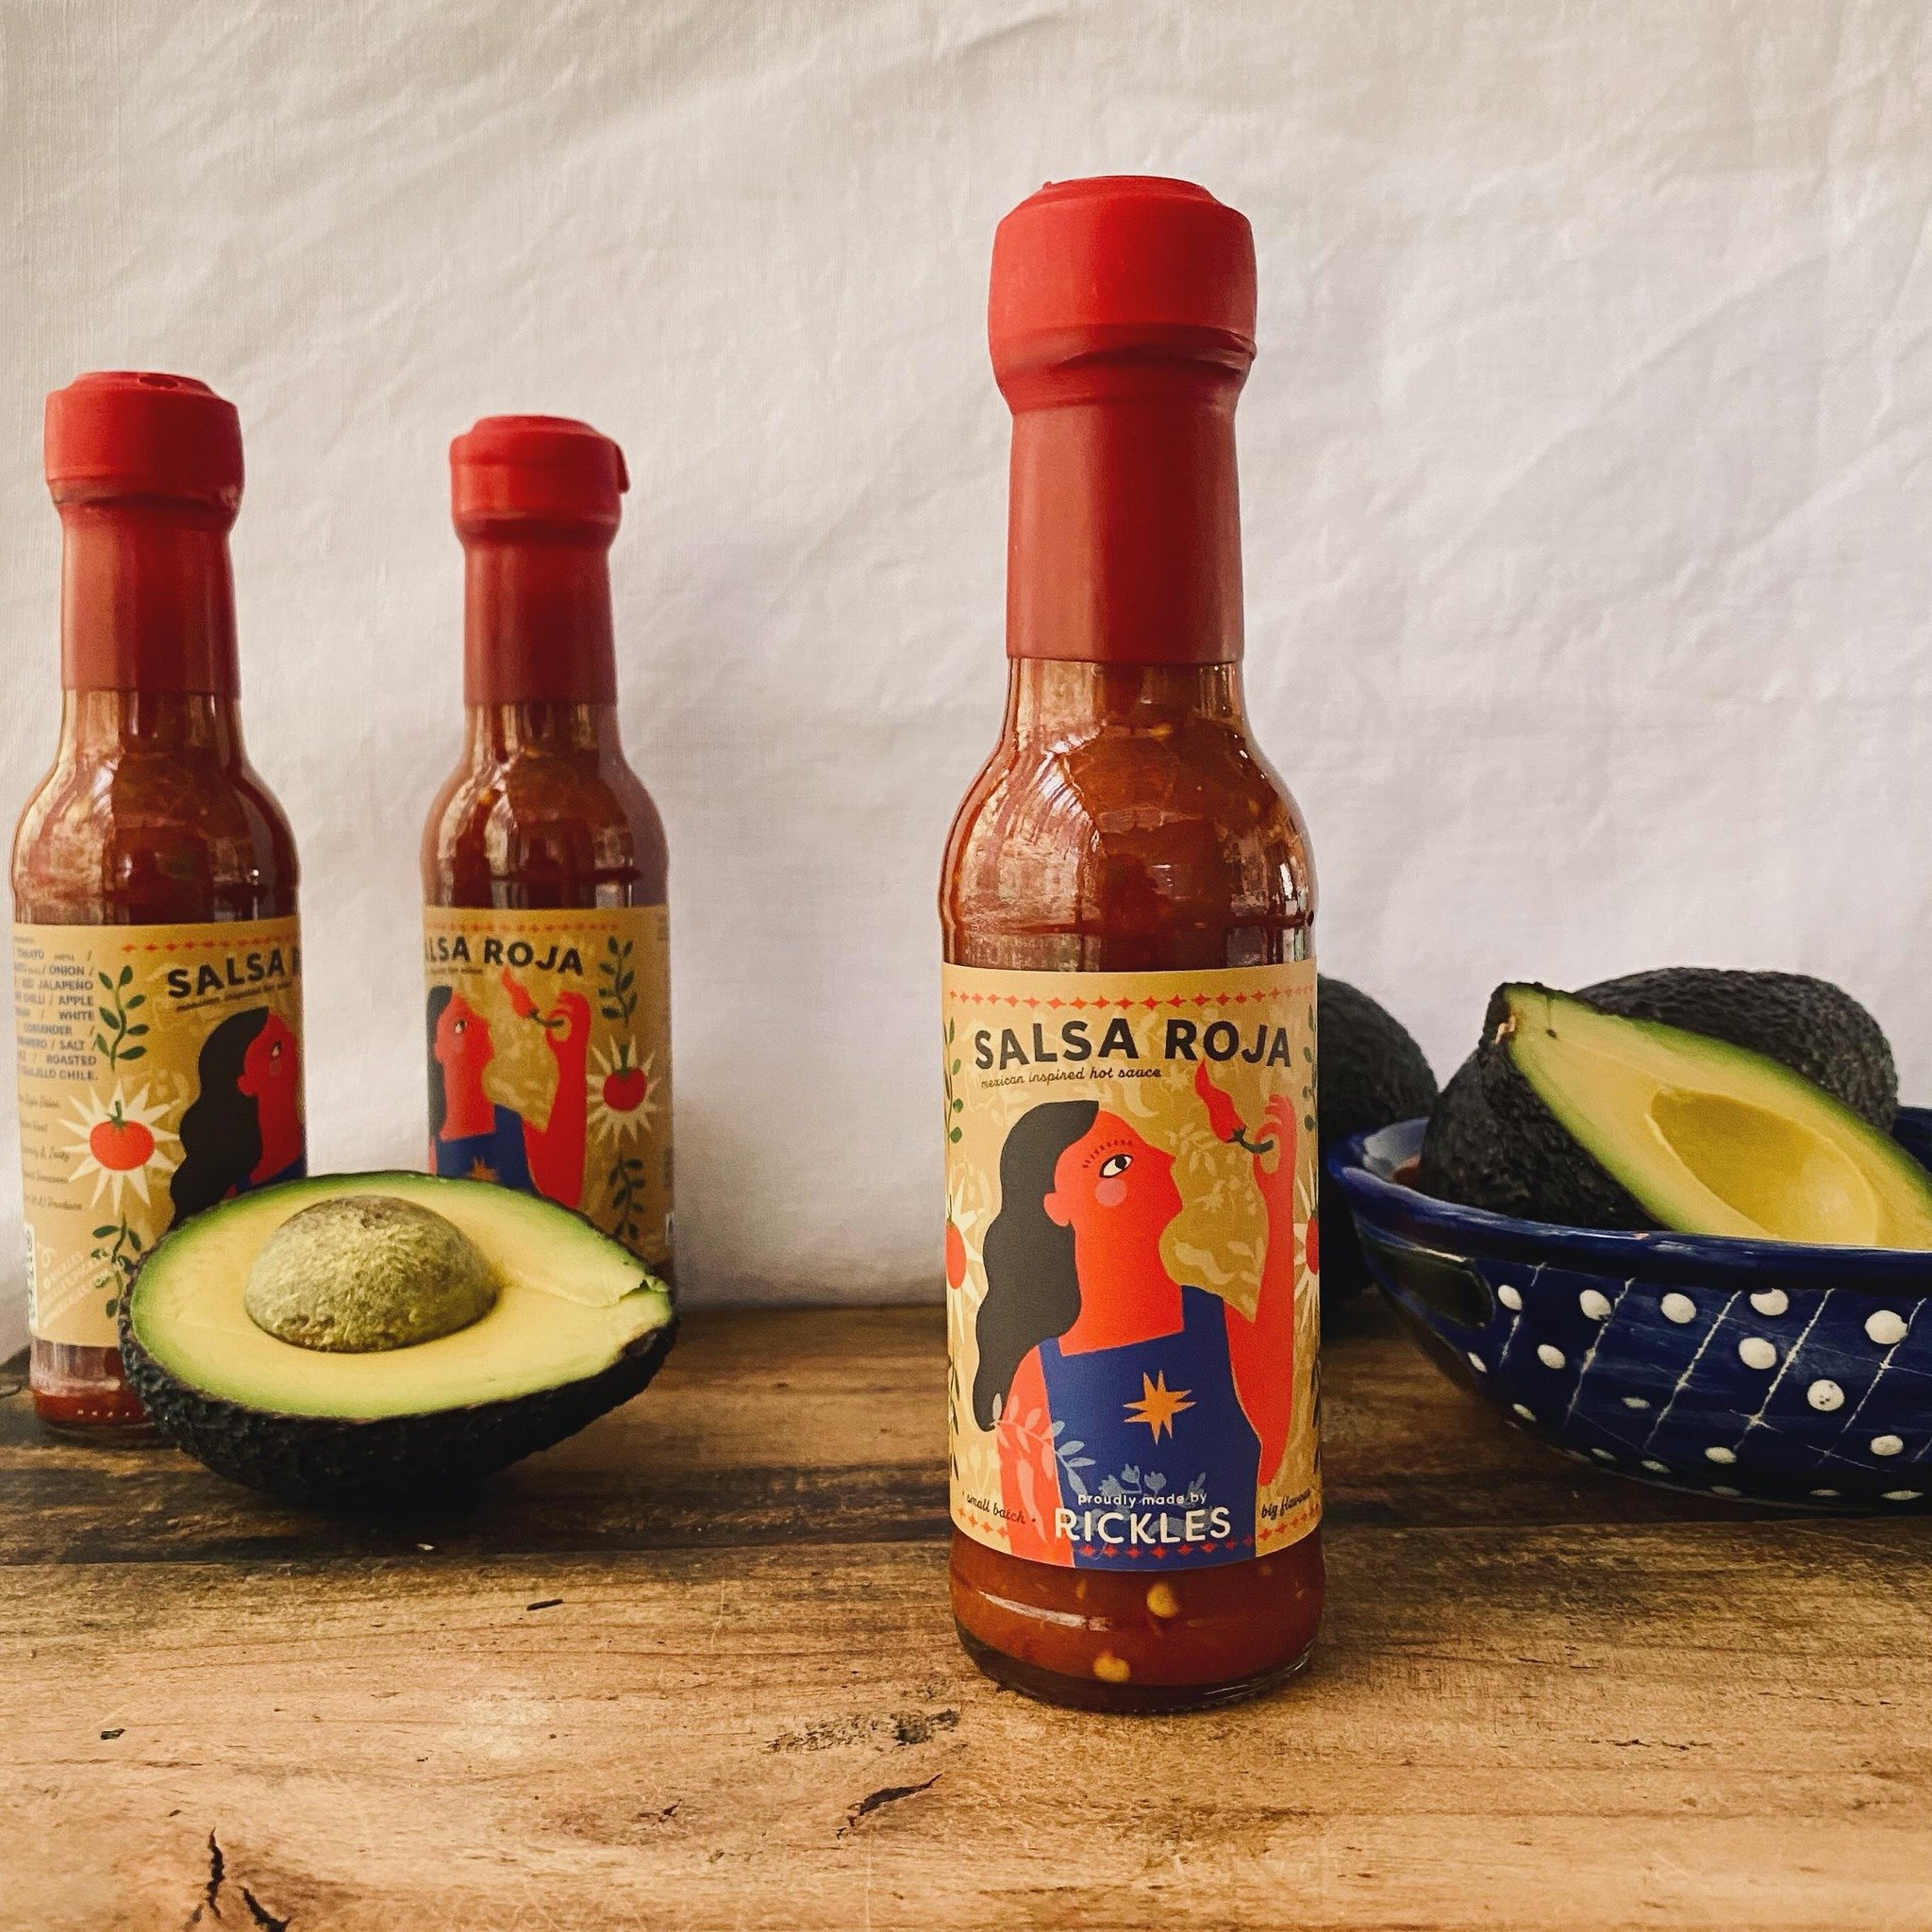 SALSA ROJA / new limited release!! 
Mexican style hot sauce that&rsquo;s fresh and zesty! 
Mild to medium heat.
Great on tacos! 
Available on our website and at markets now!
(We will be getting this out to select stockists soon as well!) 🌶️🌶️🌶️